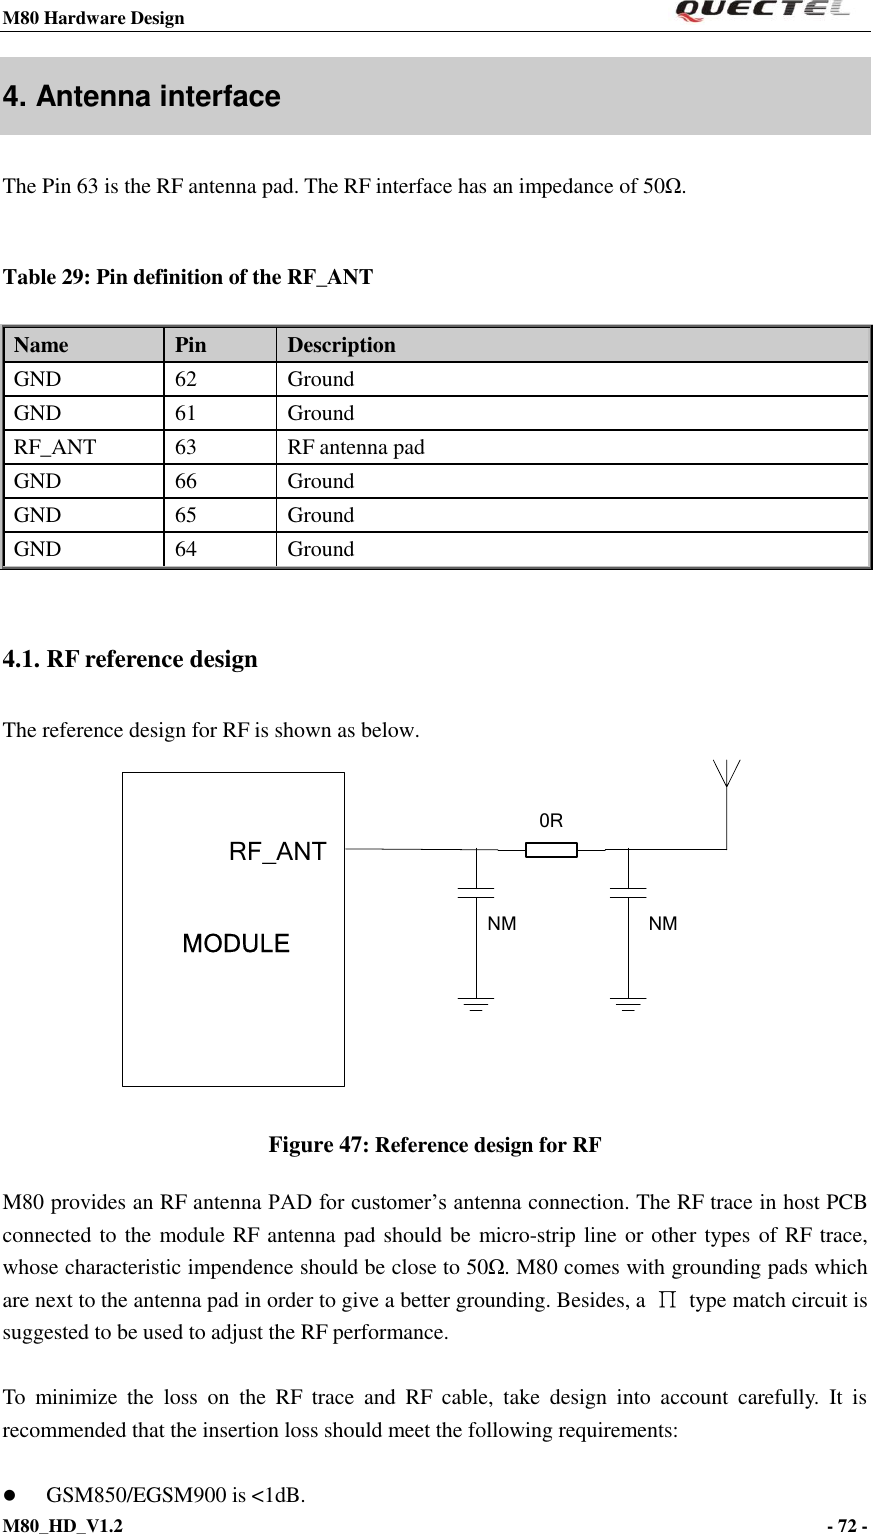 M80 Hardware Design                                                                M80_HD_V1.2                                                                                                                                        - 72 -    4. Antenna interface The Pin 63 is the RF antenna pad. The RF interface has an impedance of 50Ω.    Table 29: Pin definition of the RF_ANT  4.1. RF reference design The reference design for RF is shown as below. RF_ANT0RMODULE NMNM Figure 47: Reference design for RF M80 provides an RF antenna PAD for customer’s antenna connection. The RF trace in host PCB connected to the module RF antenna pad should be micro-strip line or other types of RF trace, whose characteristic impendence should be close to 50Ω. M80 comes with grounding pads which are next to the antenna pad in order to give a better grounding. Besides, a  ∏  type match circuit is suggested to be used to adjust the RF performance.  To  minimize  the  loss  on  the  RF  trace  and  RF  cable,  take  design  into  account  carefully.  It  is recommended that the insertion loss should meet the following requirements:   GSM850/EGSM900 is &lt;1dB.   Name   Pin   Description GND 62 Ground GND 61 Ground RF_ANT 63 RF antenna pad GND 66 Ground GND 65 Ground GND 64 Ground 